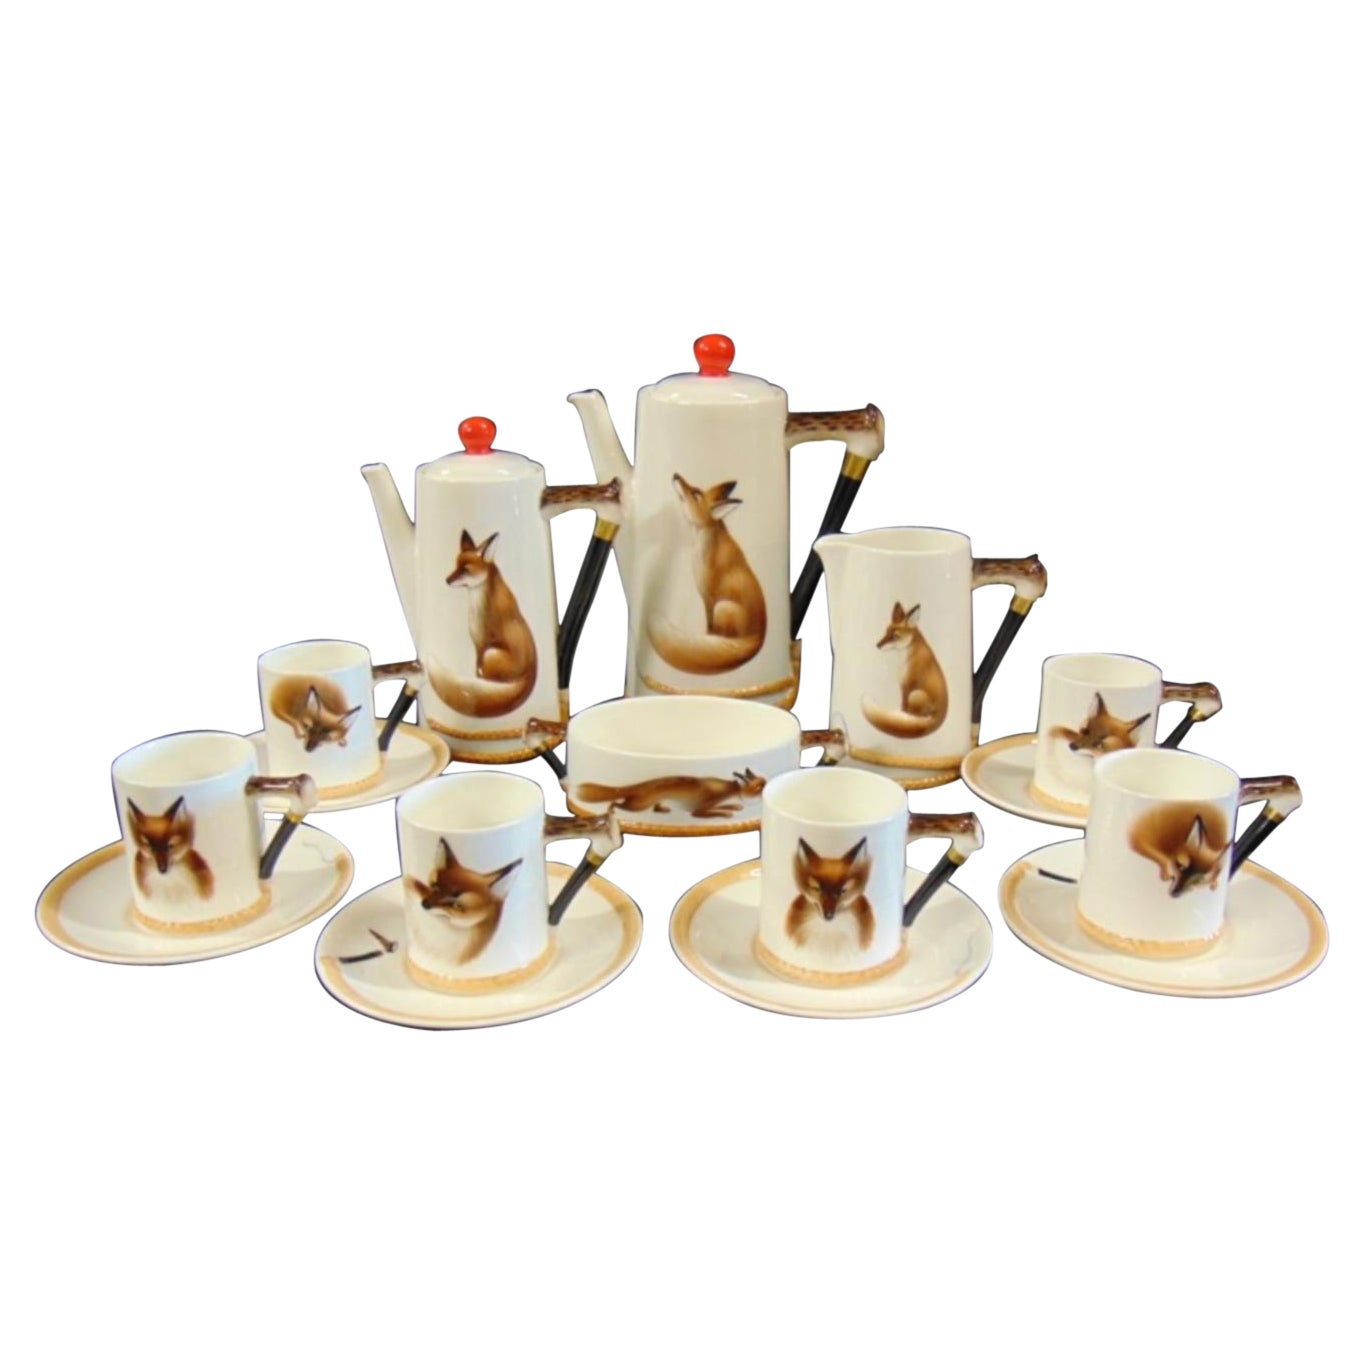 Royal Doulton Reynard Porcelain Coffee Service Set with Hand Painted Fox Motif